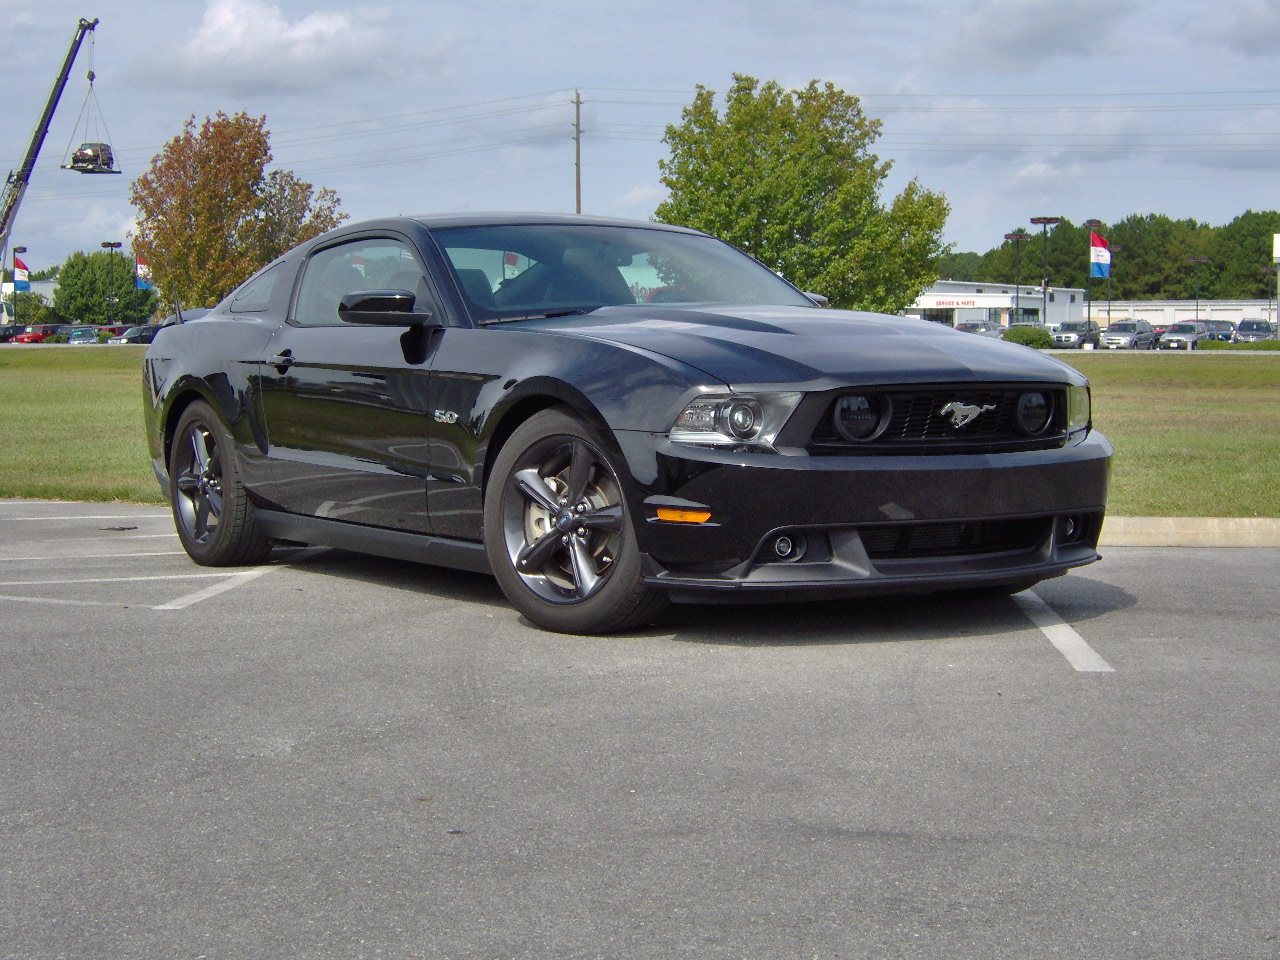 2011 Ford mustang gt quarter mile time #2